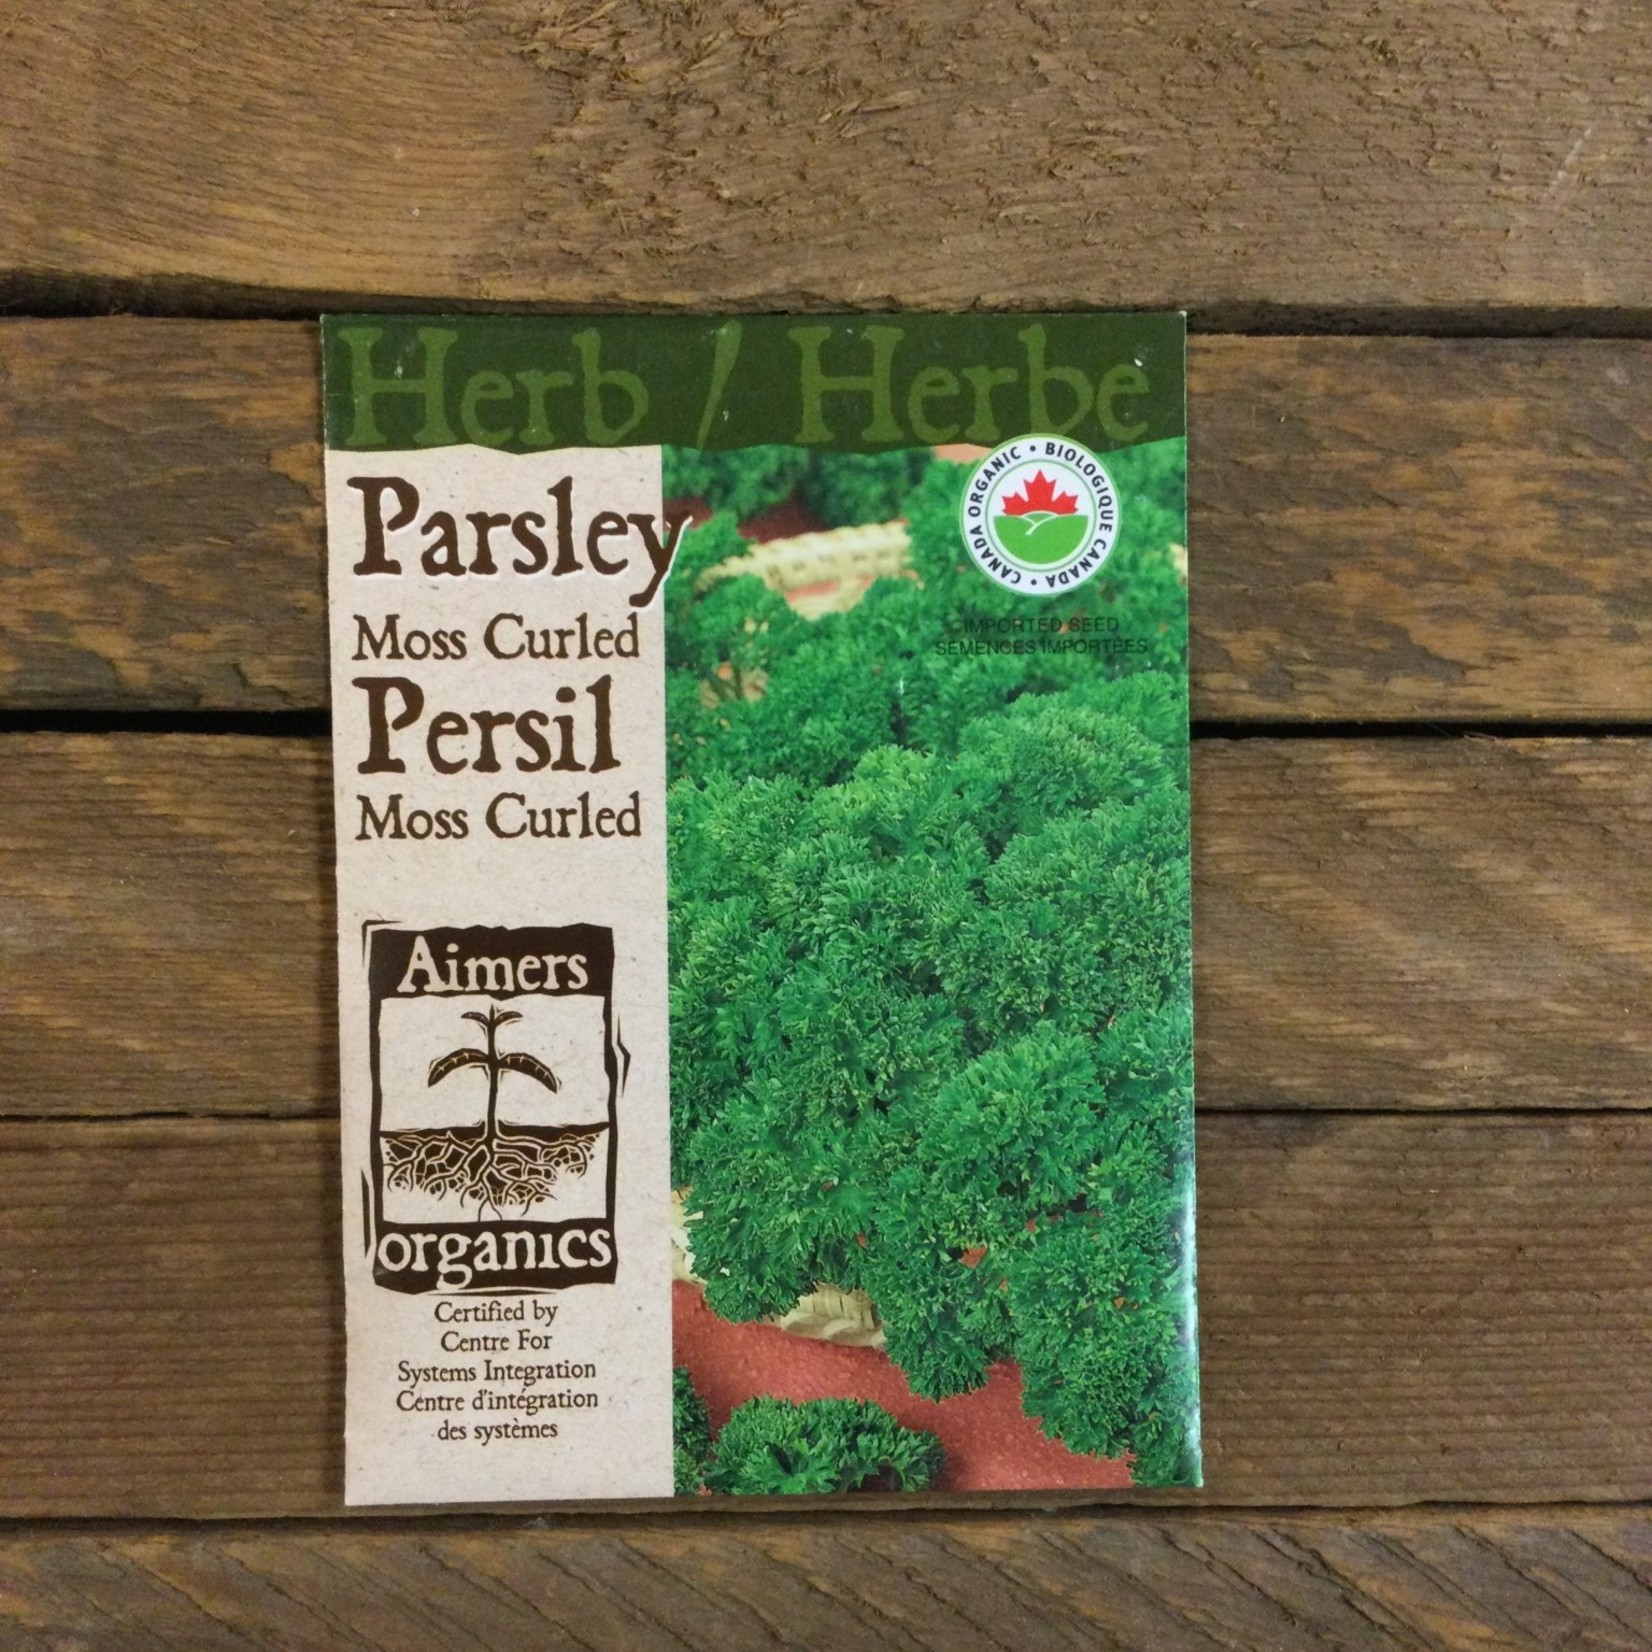 Aimers Parsley 'Moss Curled' Organic Seed